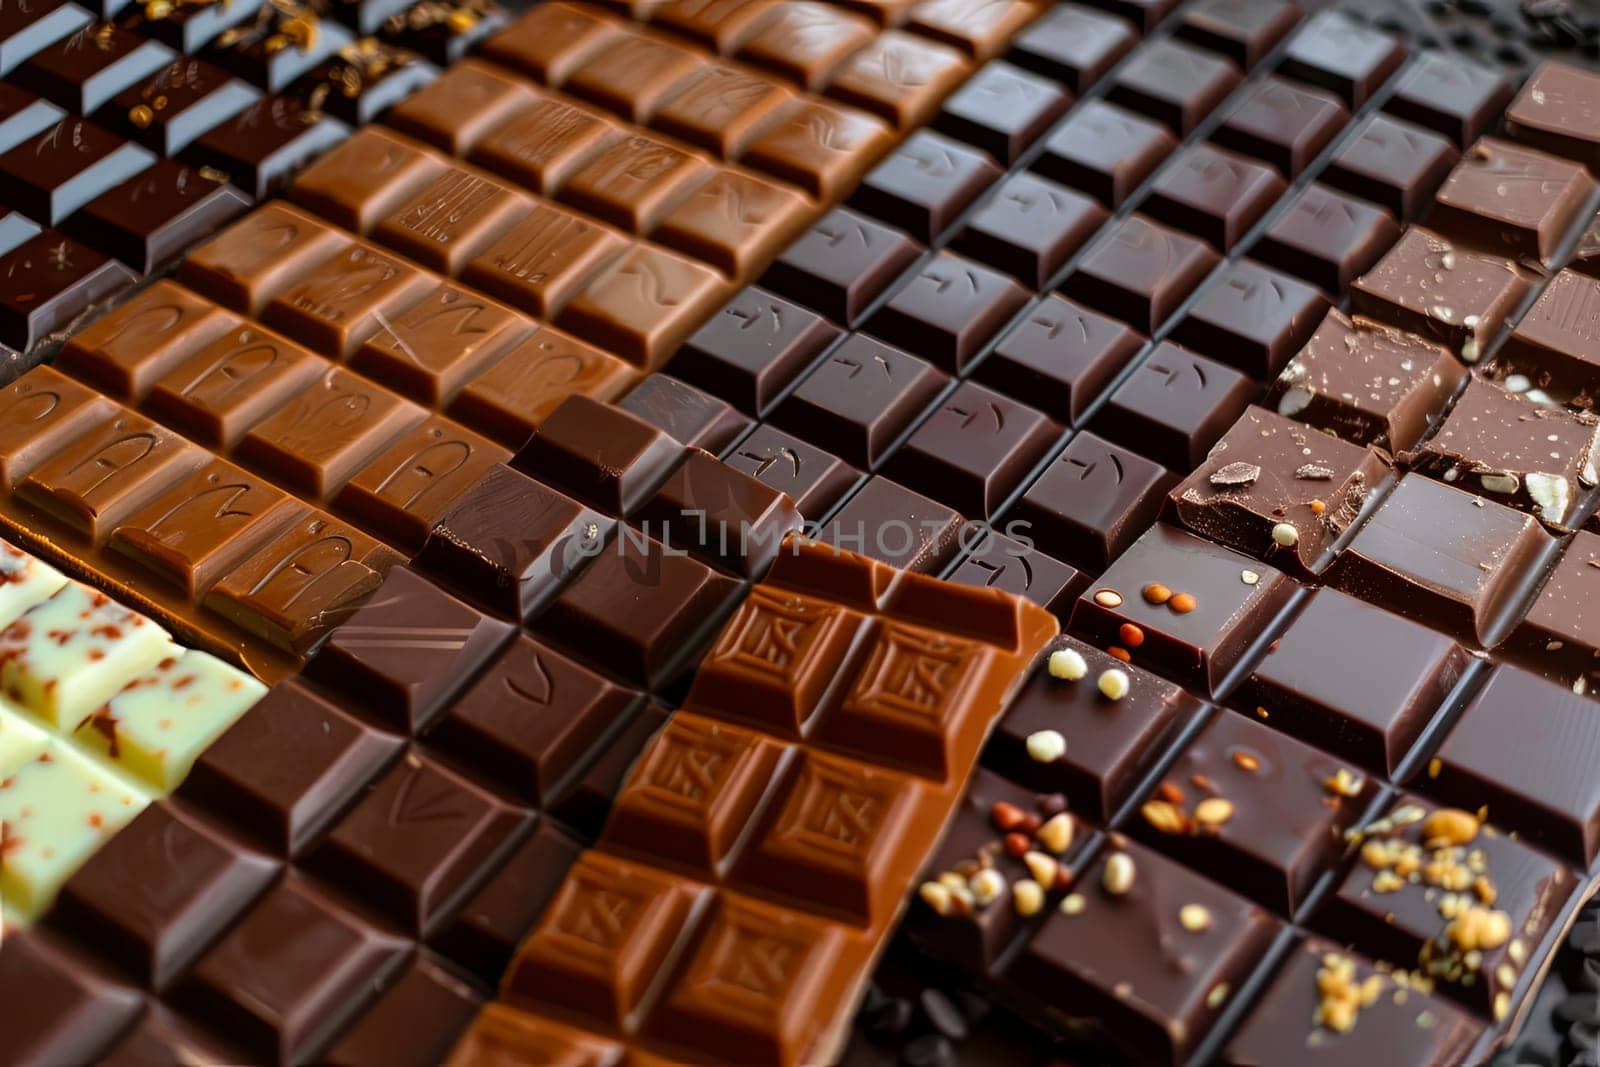 A detailed close-up of a variety of chocolate bars with rich colors, neatly arranged.